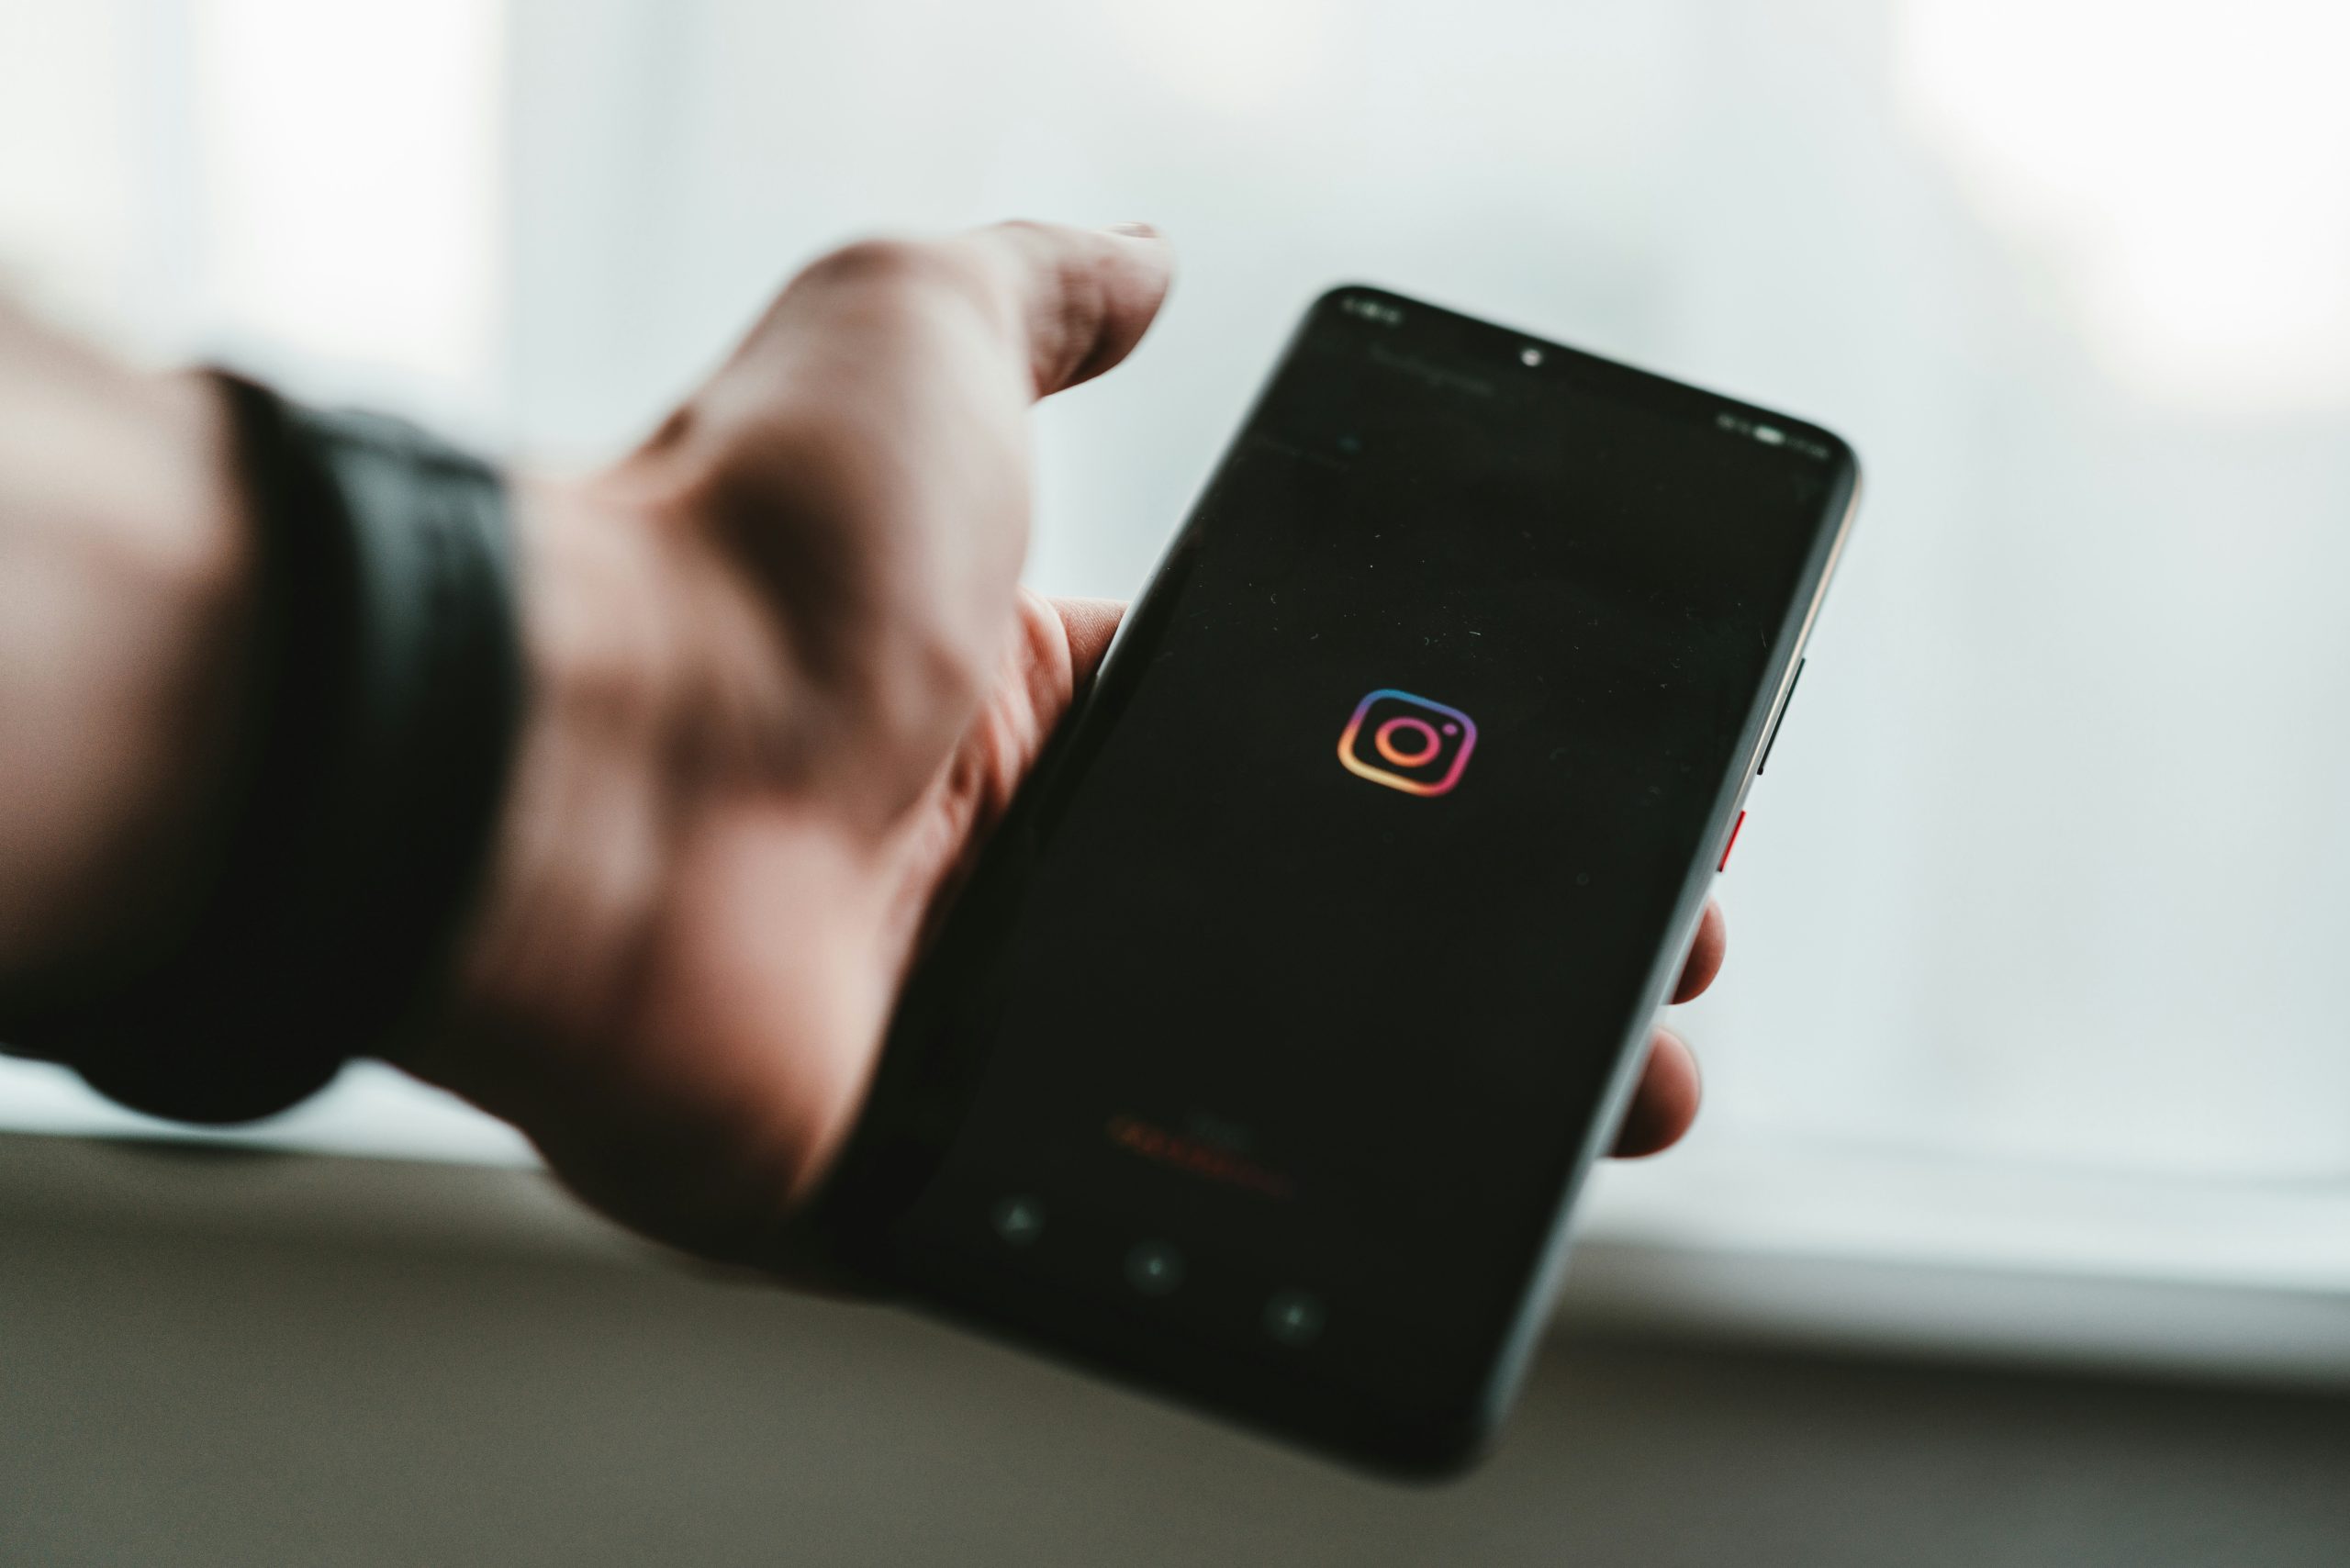 a hand holding a cellphone with the Instagram logo on the screen